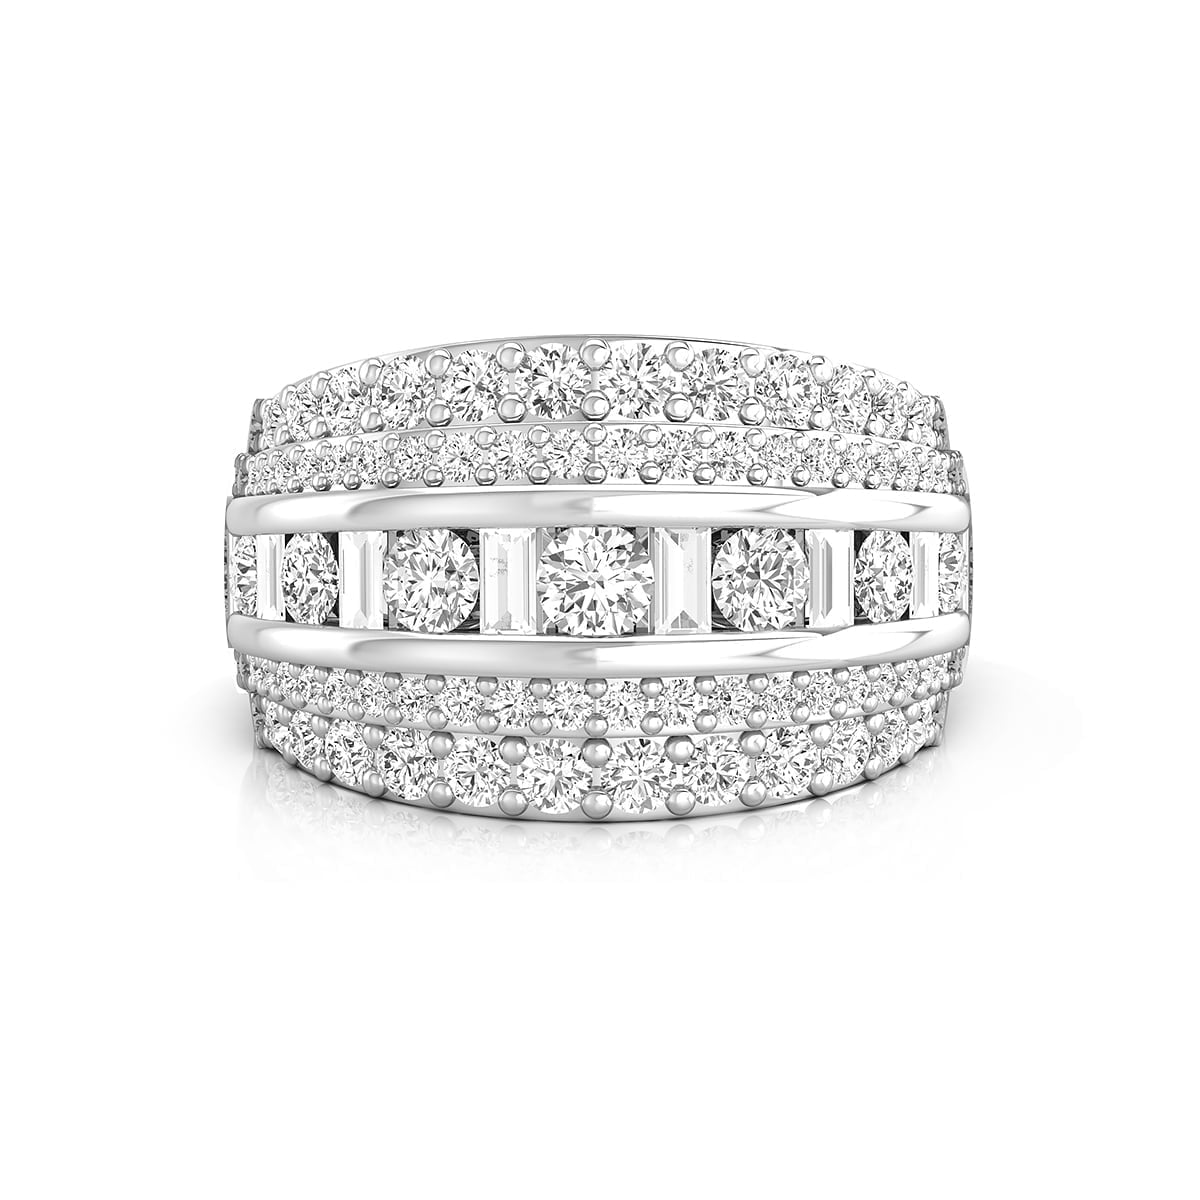 Round With Baguette Cut CZ Stone Channel Setting Wedding Band Ring (1 5/9 TCW)